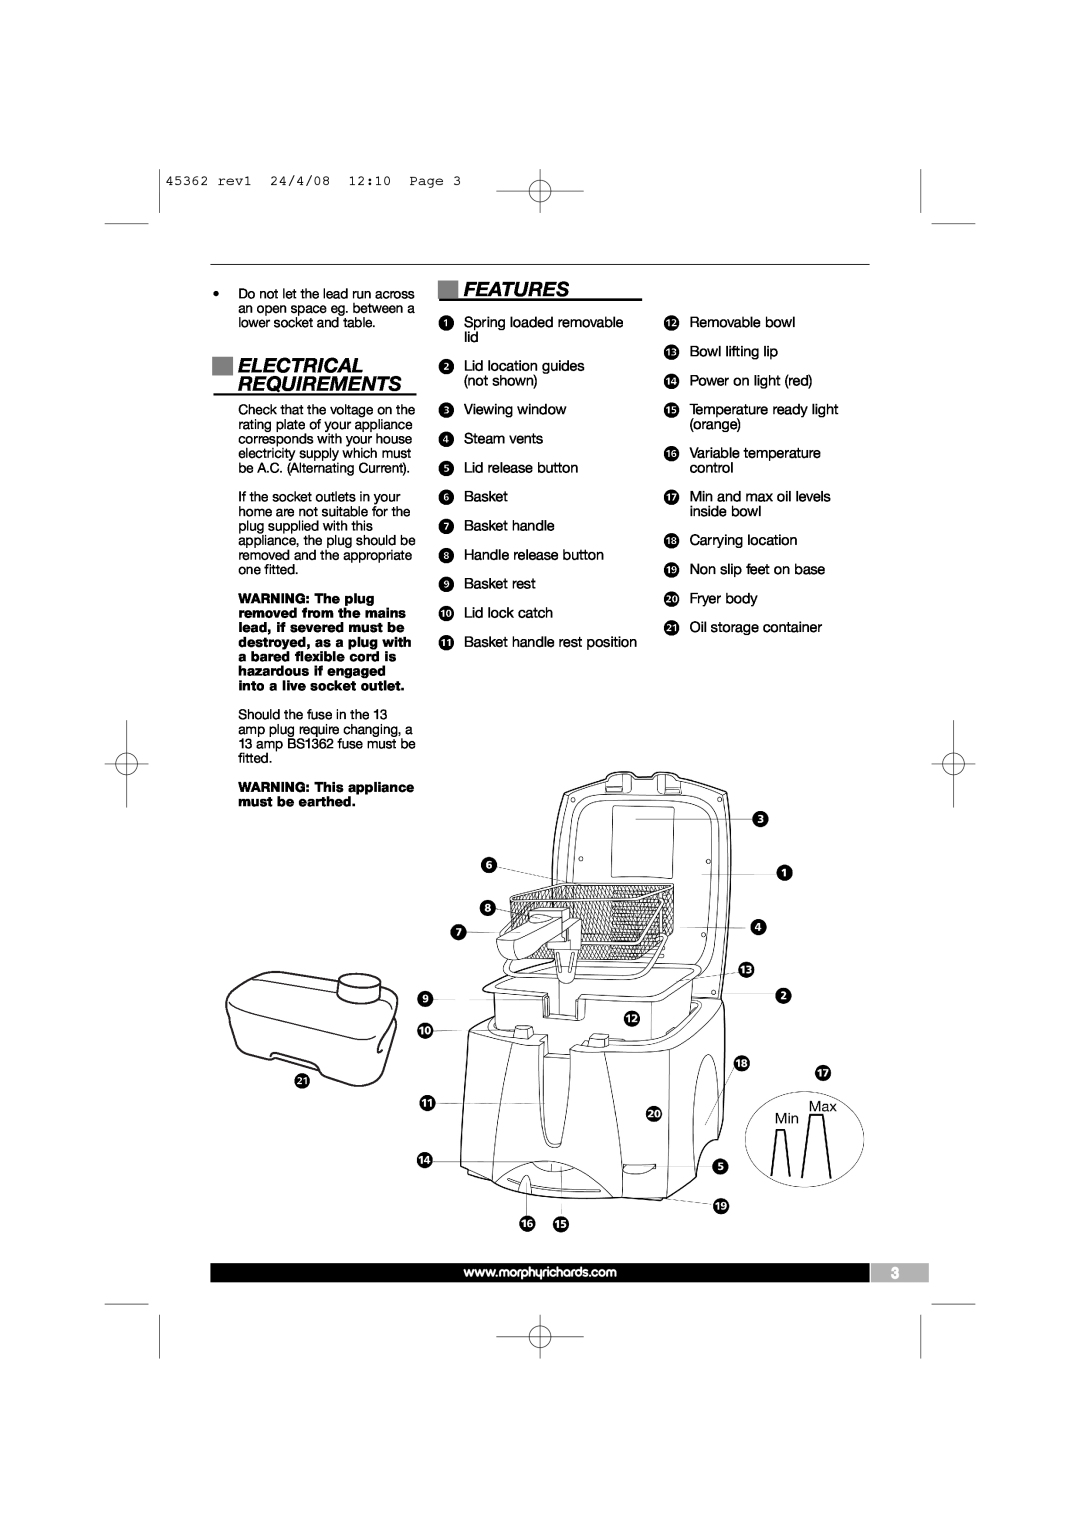 Morphy Richards 45362 manual Features, Electrical, Requirements 